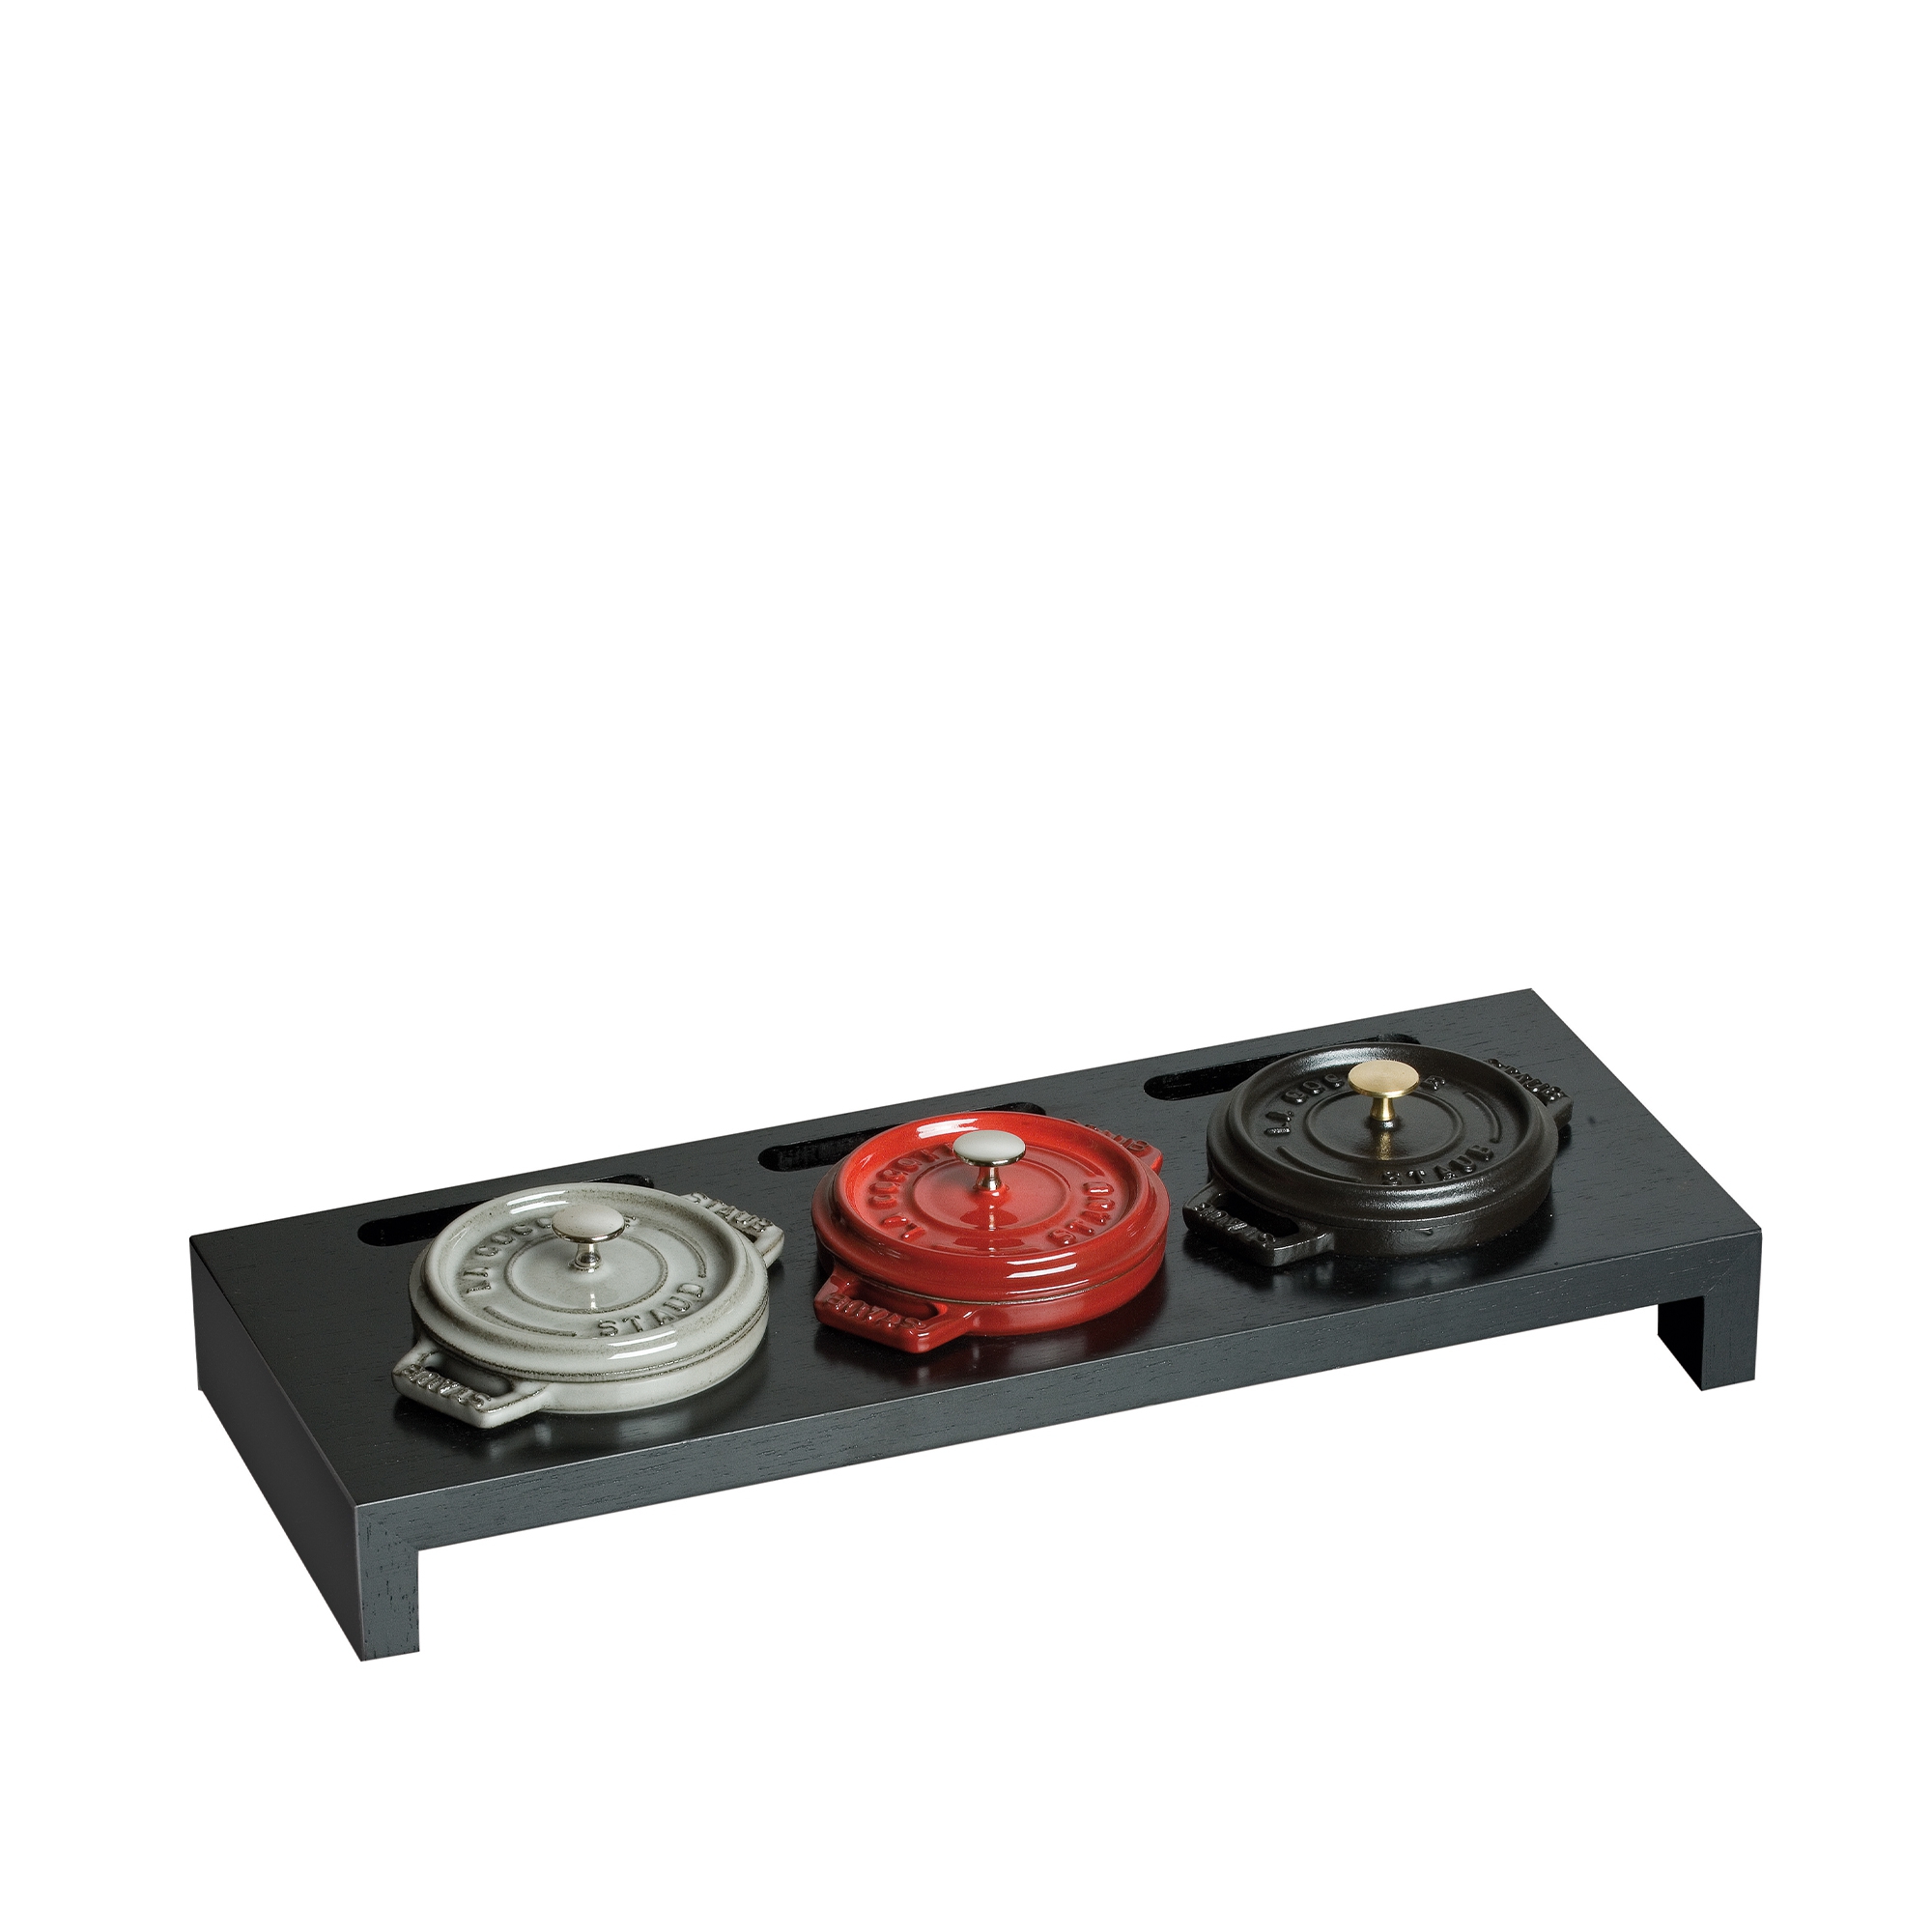 Staub - Stand for 3 Mini-Cocottes